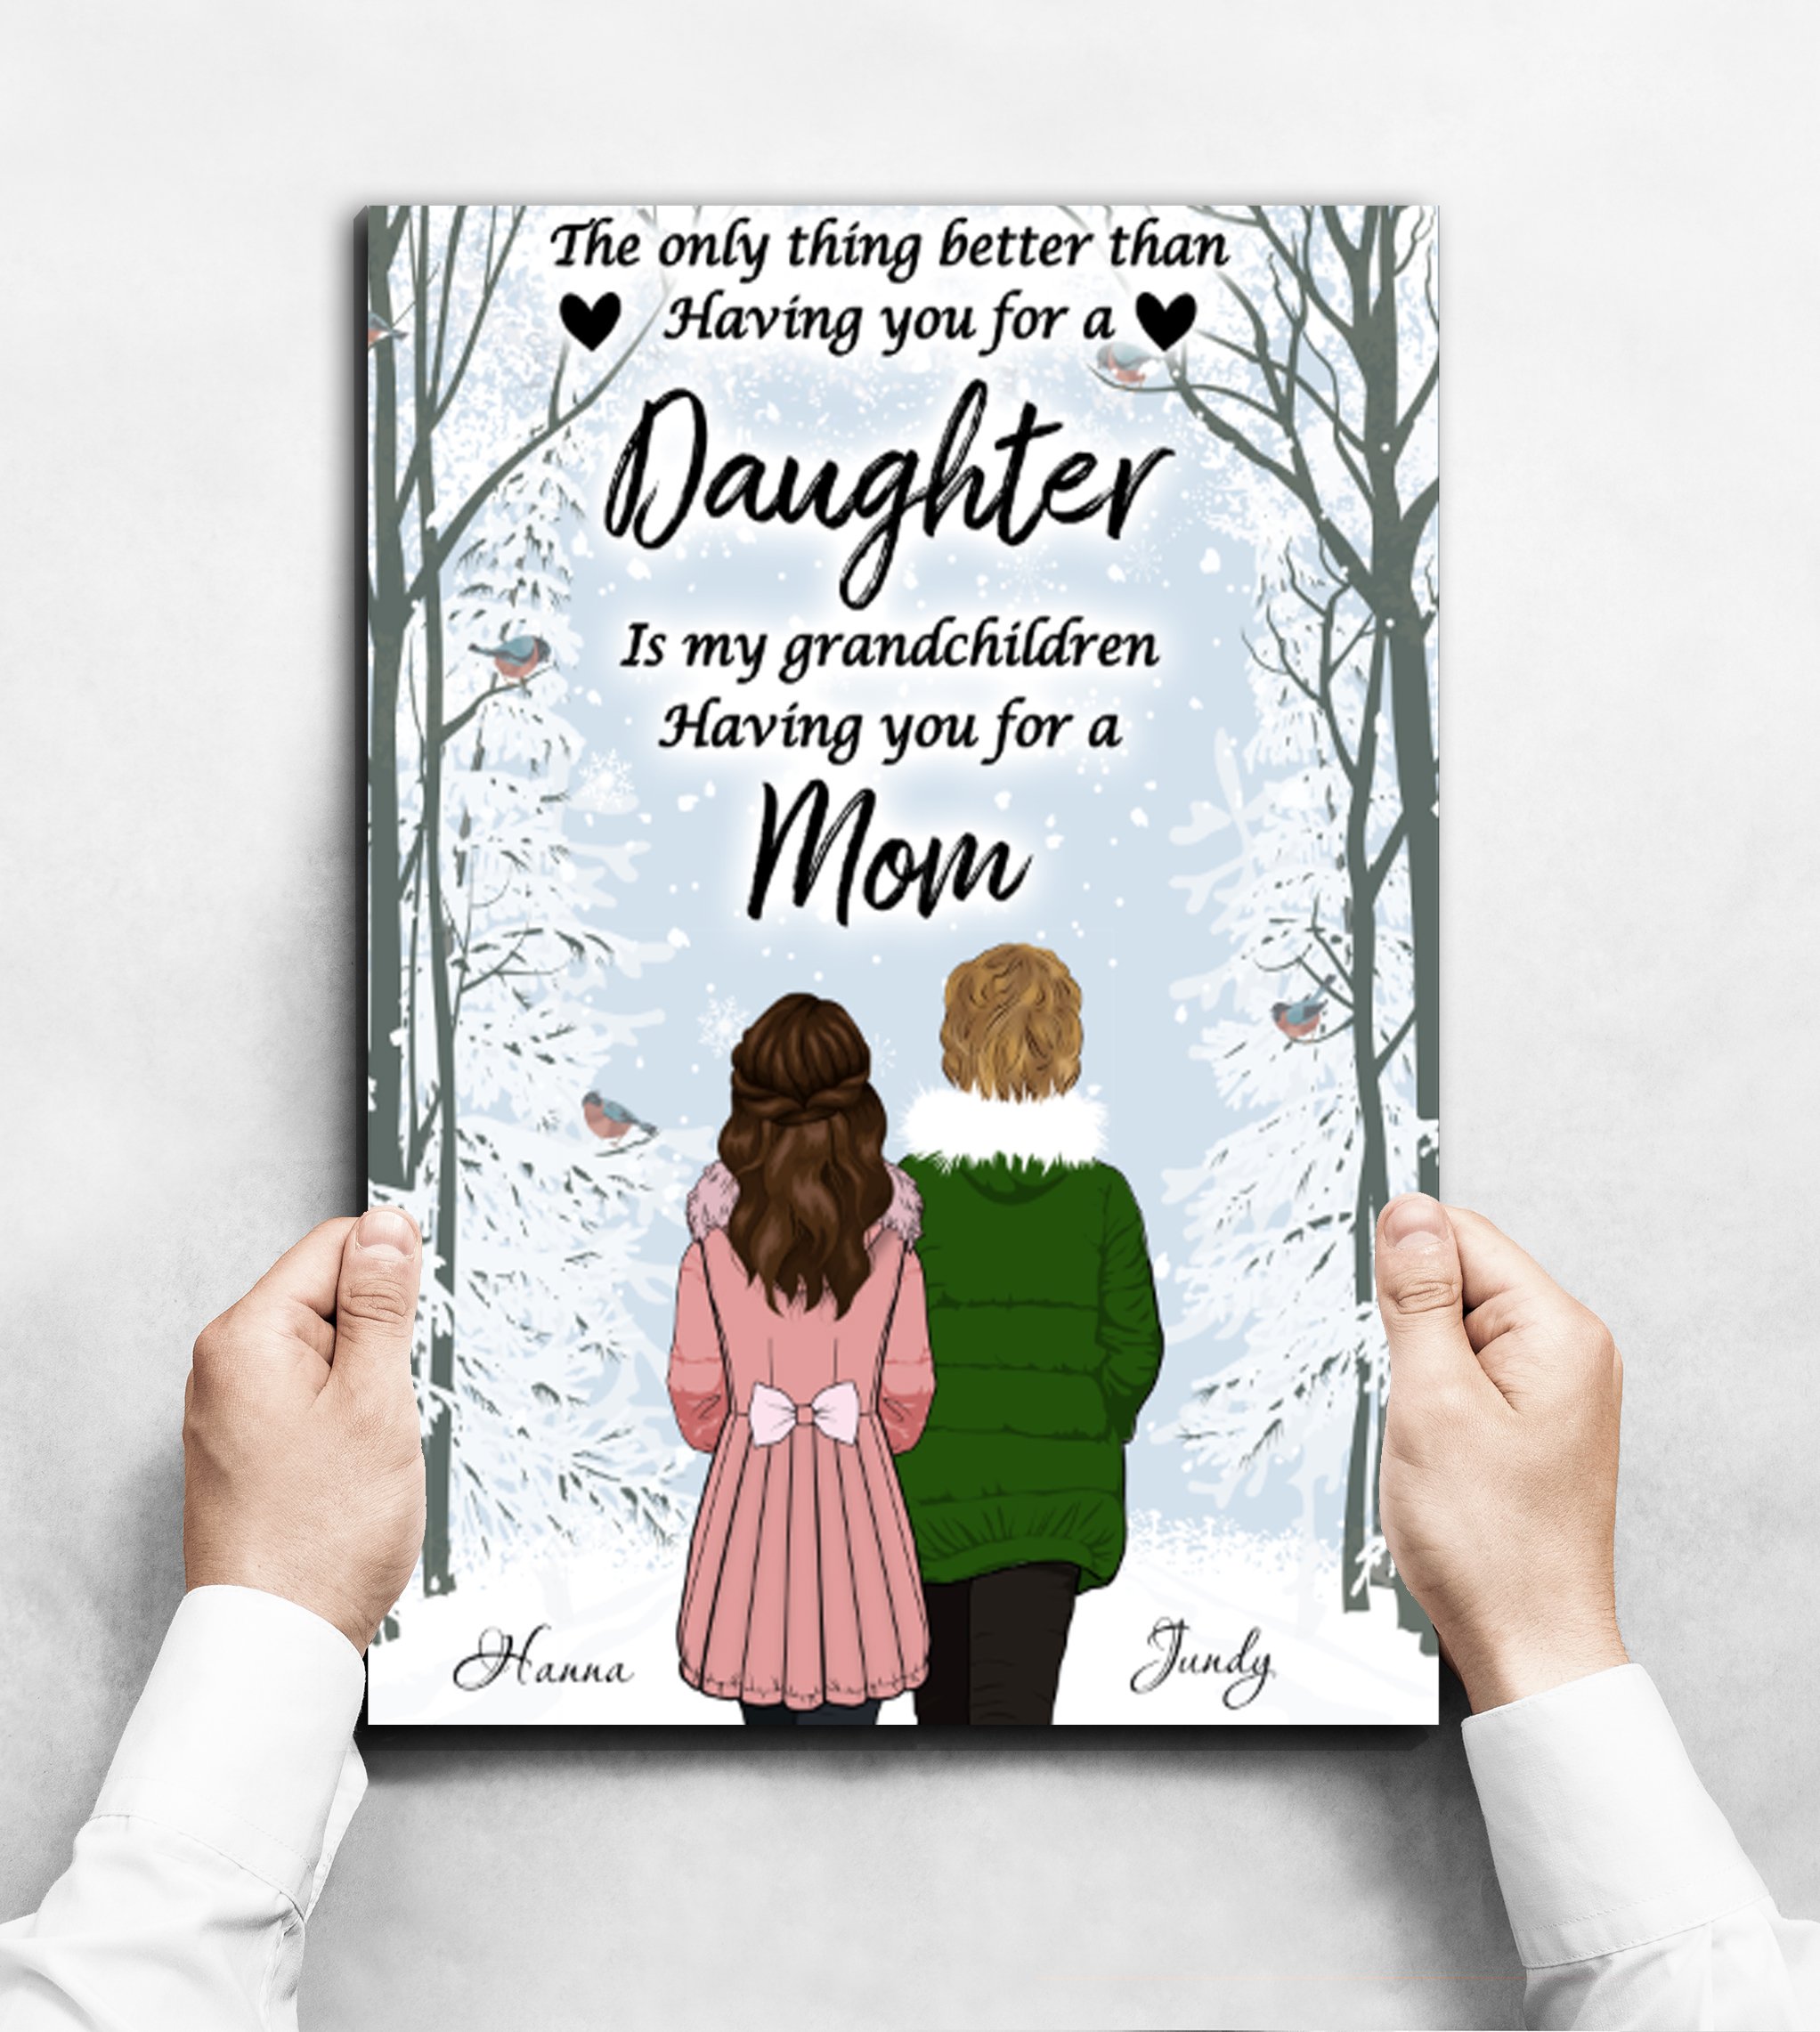 Custom personalized canvas prints wall art Mother's day gifts idea, Christmas, birthday presents for mom from daughter - A Mother Daughter Bond